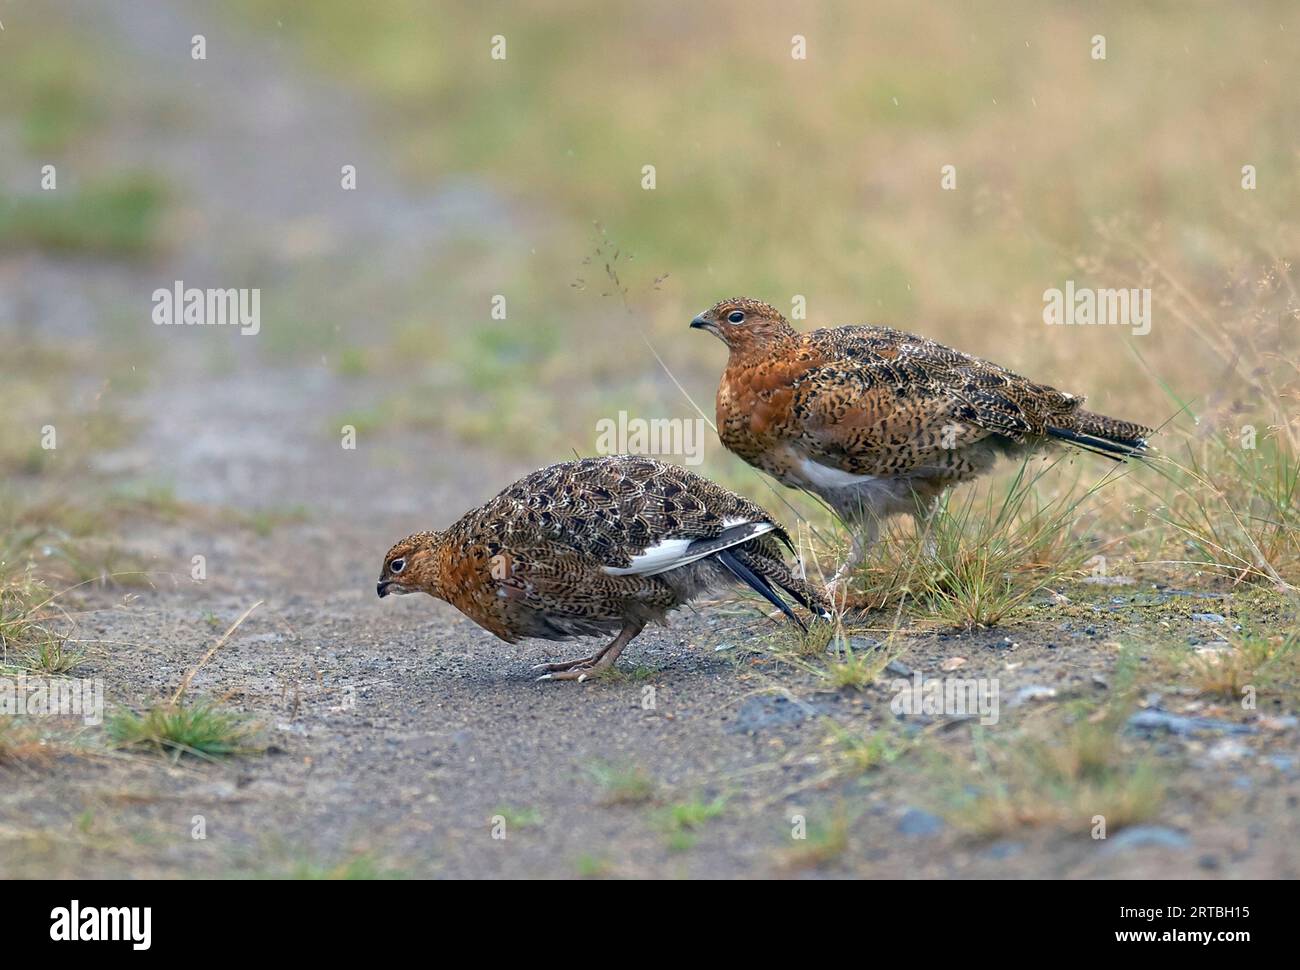 willow grouse, willow ptarmigan (Lagopus lagopus), two immatures foraging on a path, side view, Finland Stock Photo